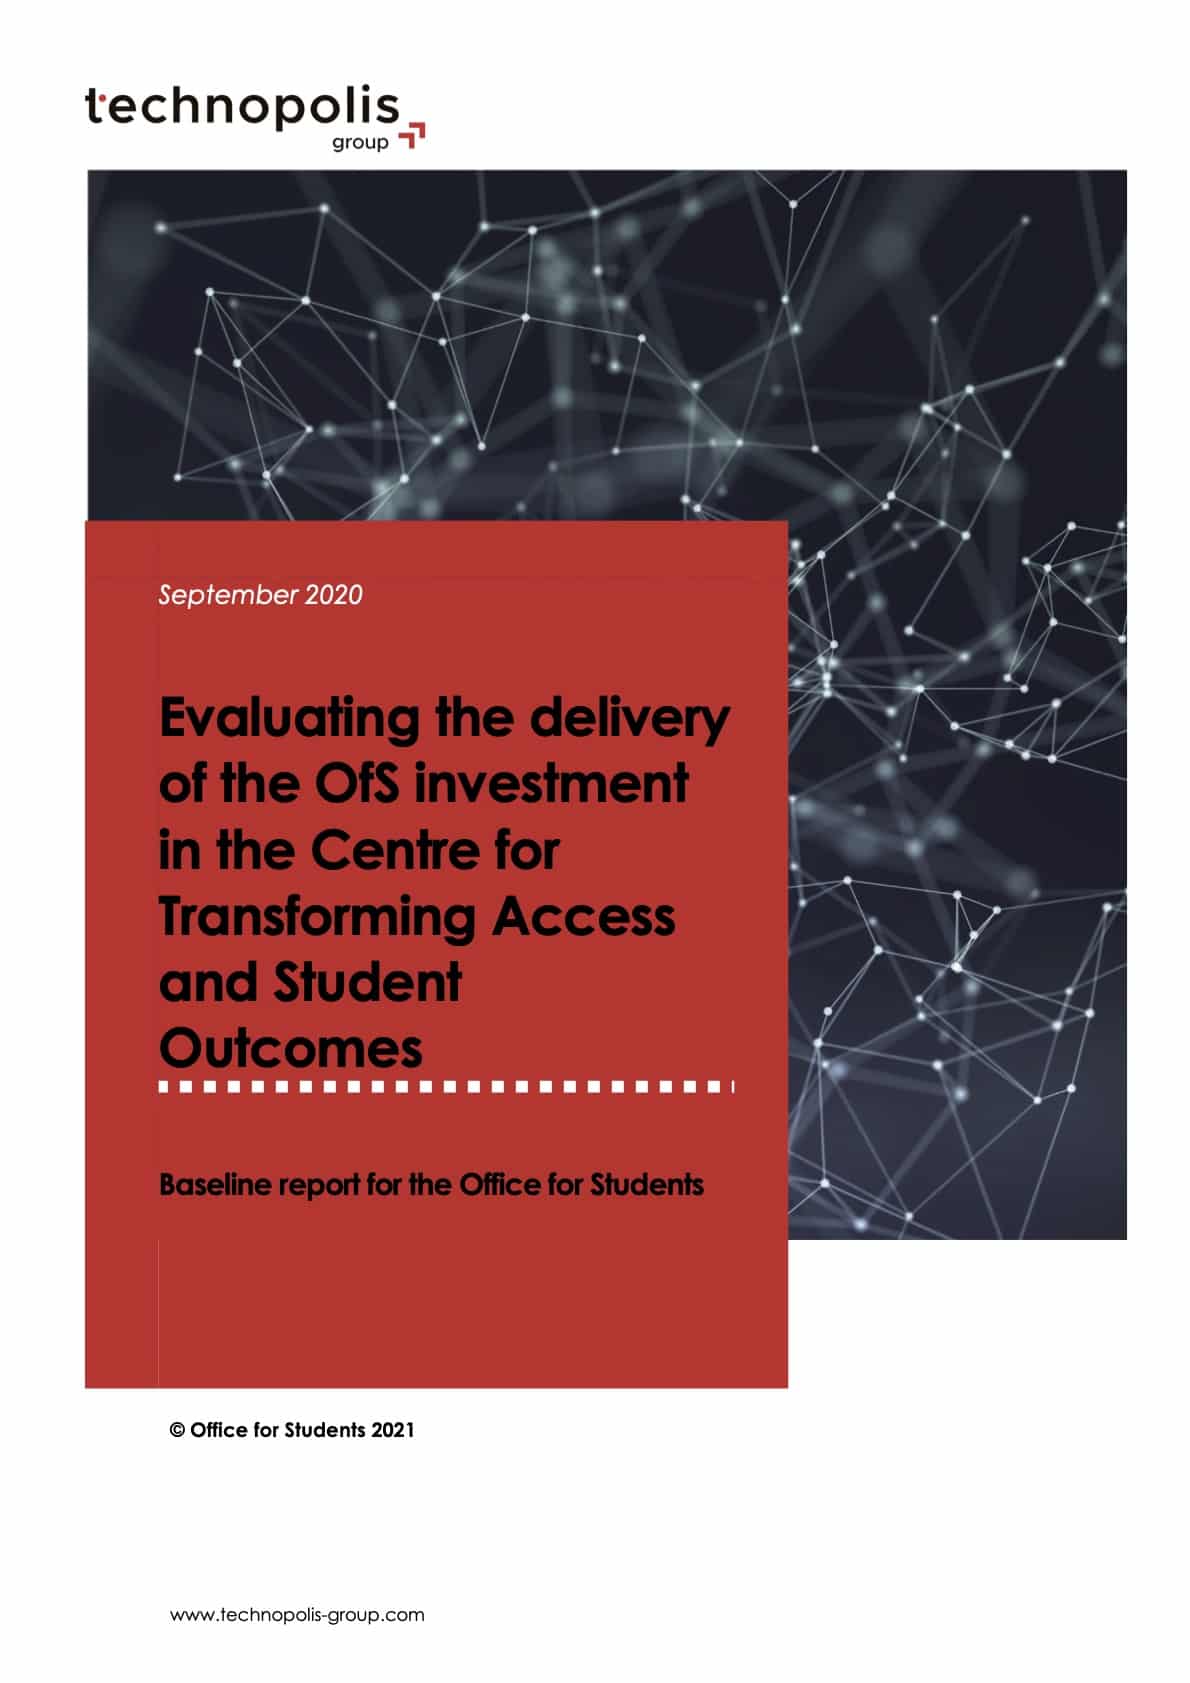 Evaluating the delivery of the OfS investment in the Centre for Transforming Access and Student Outcomes